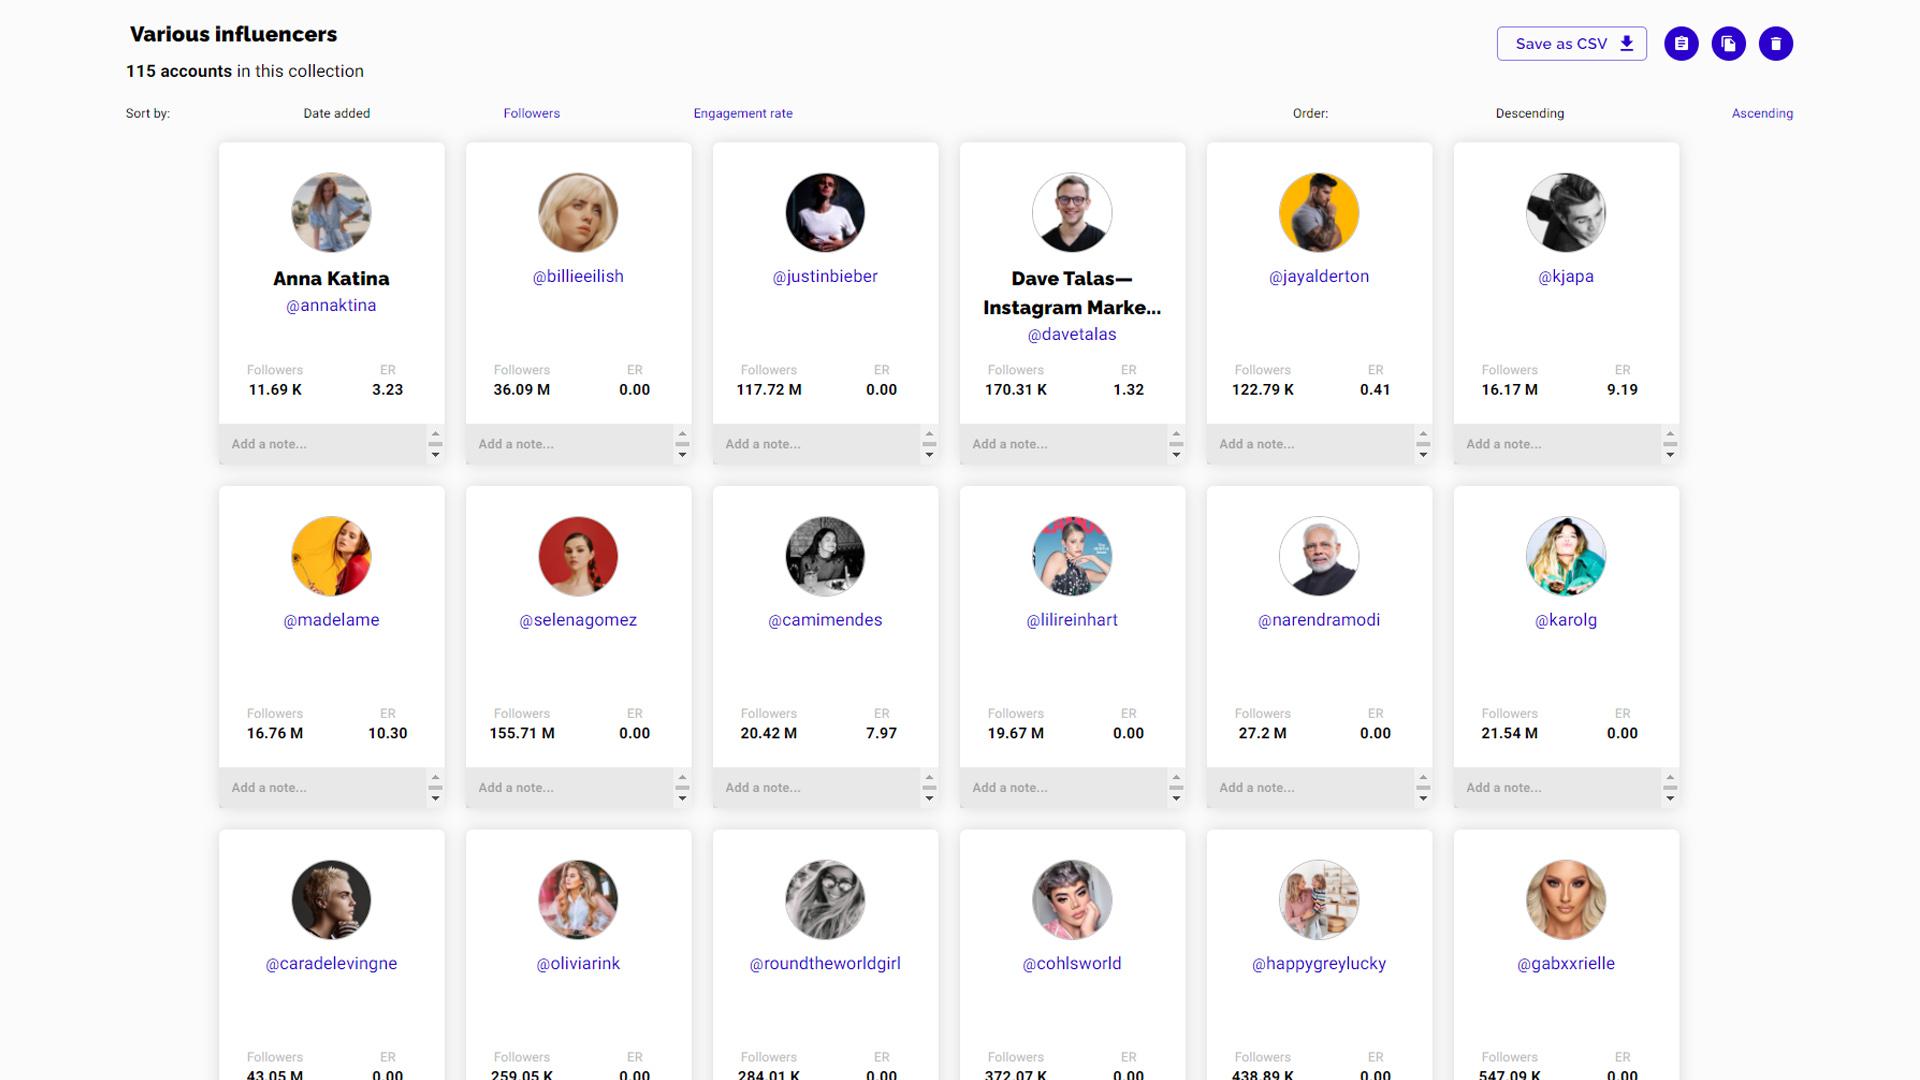 Neontools - Example of an influencer/account collection